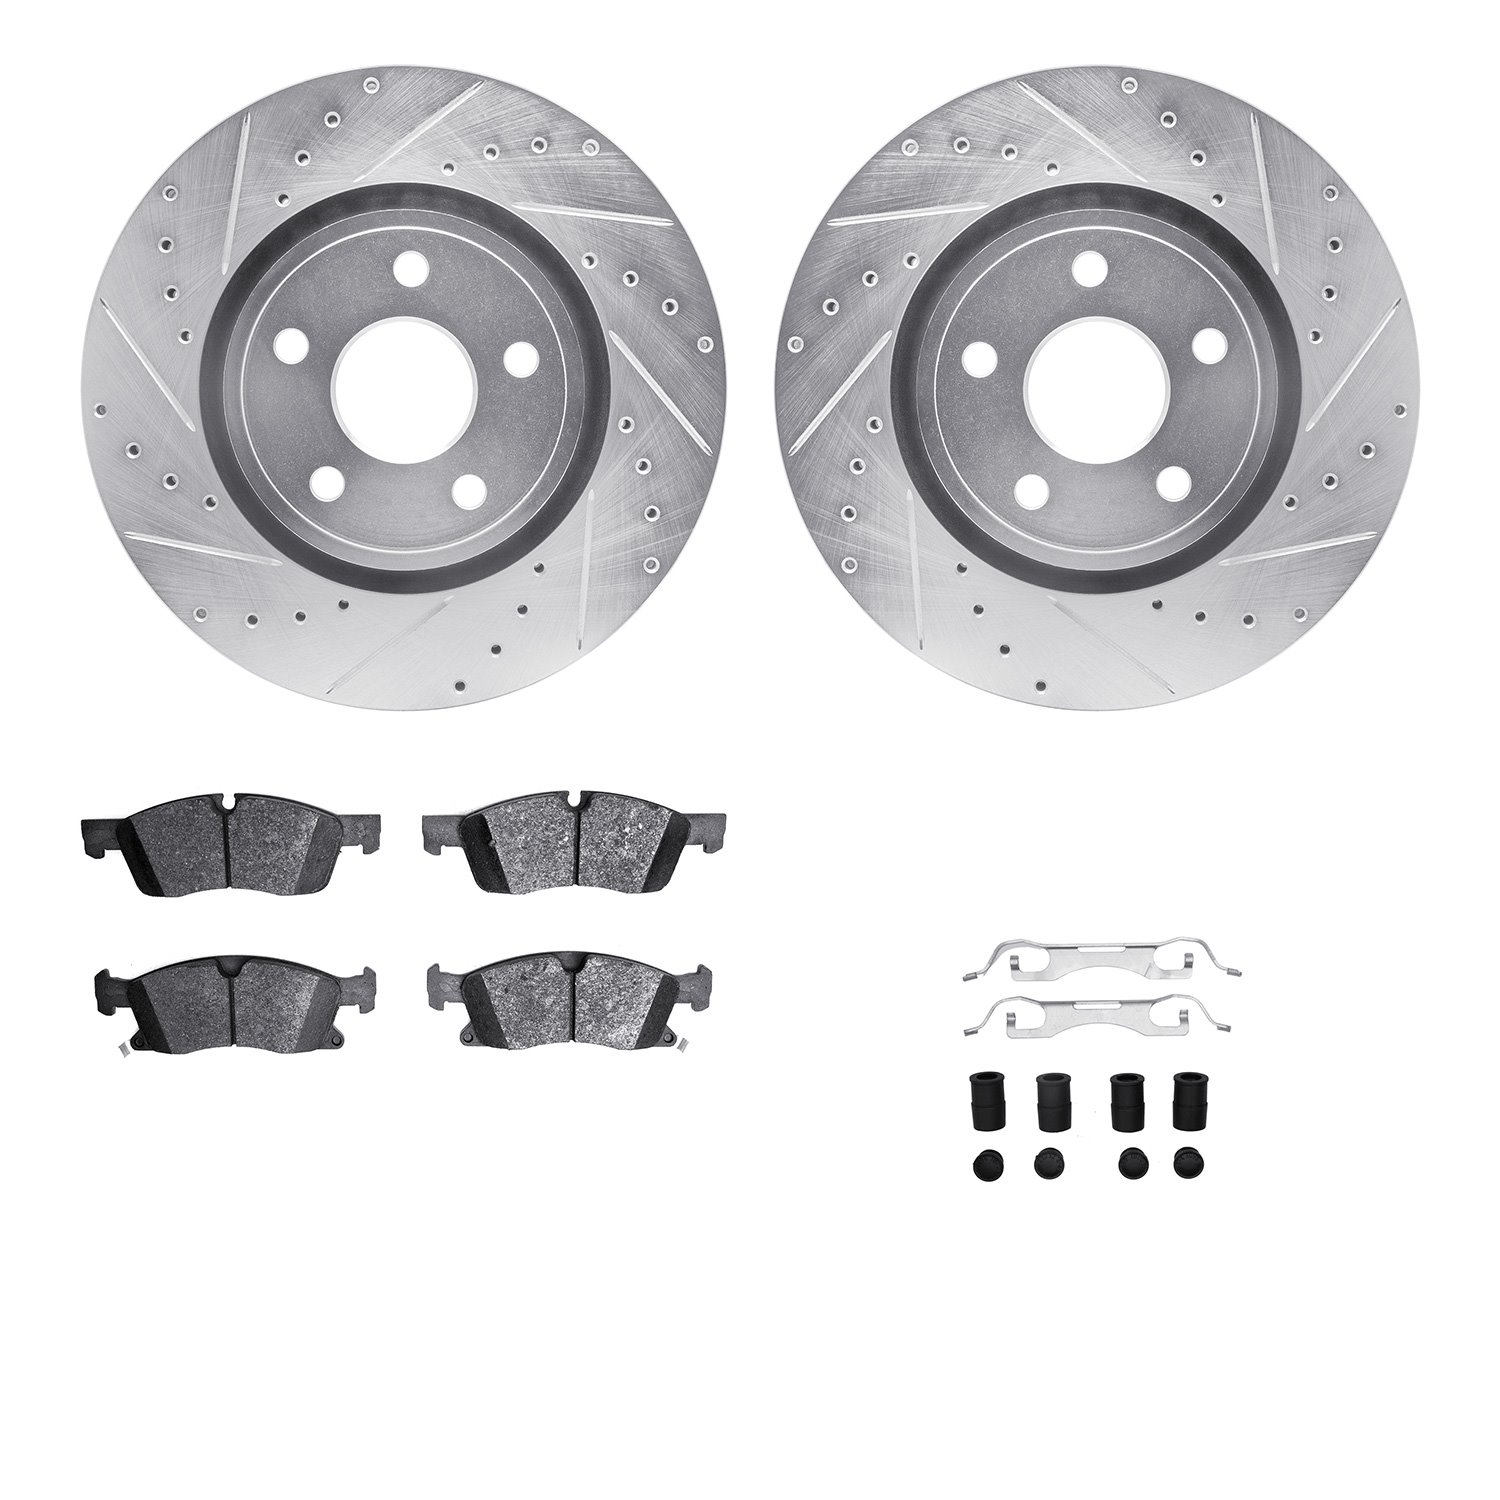 7412-42008 Drilled/Slotted Brake Rotors with Ultimate-Duty Brake Pads Kit & Hardware [Silver], Fits Select Mopar, Position: Fron